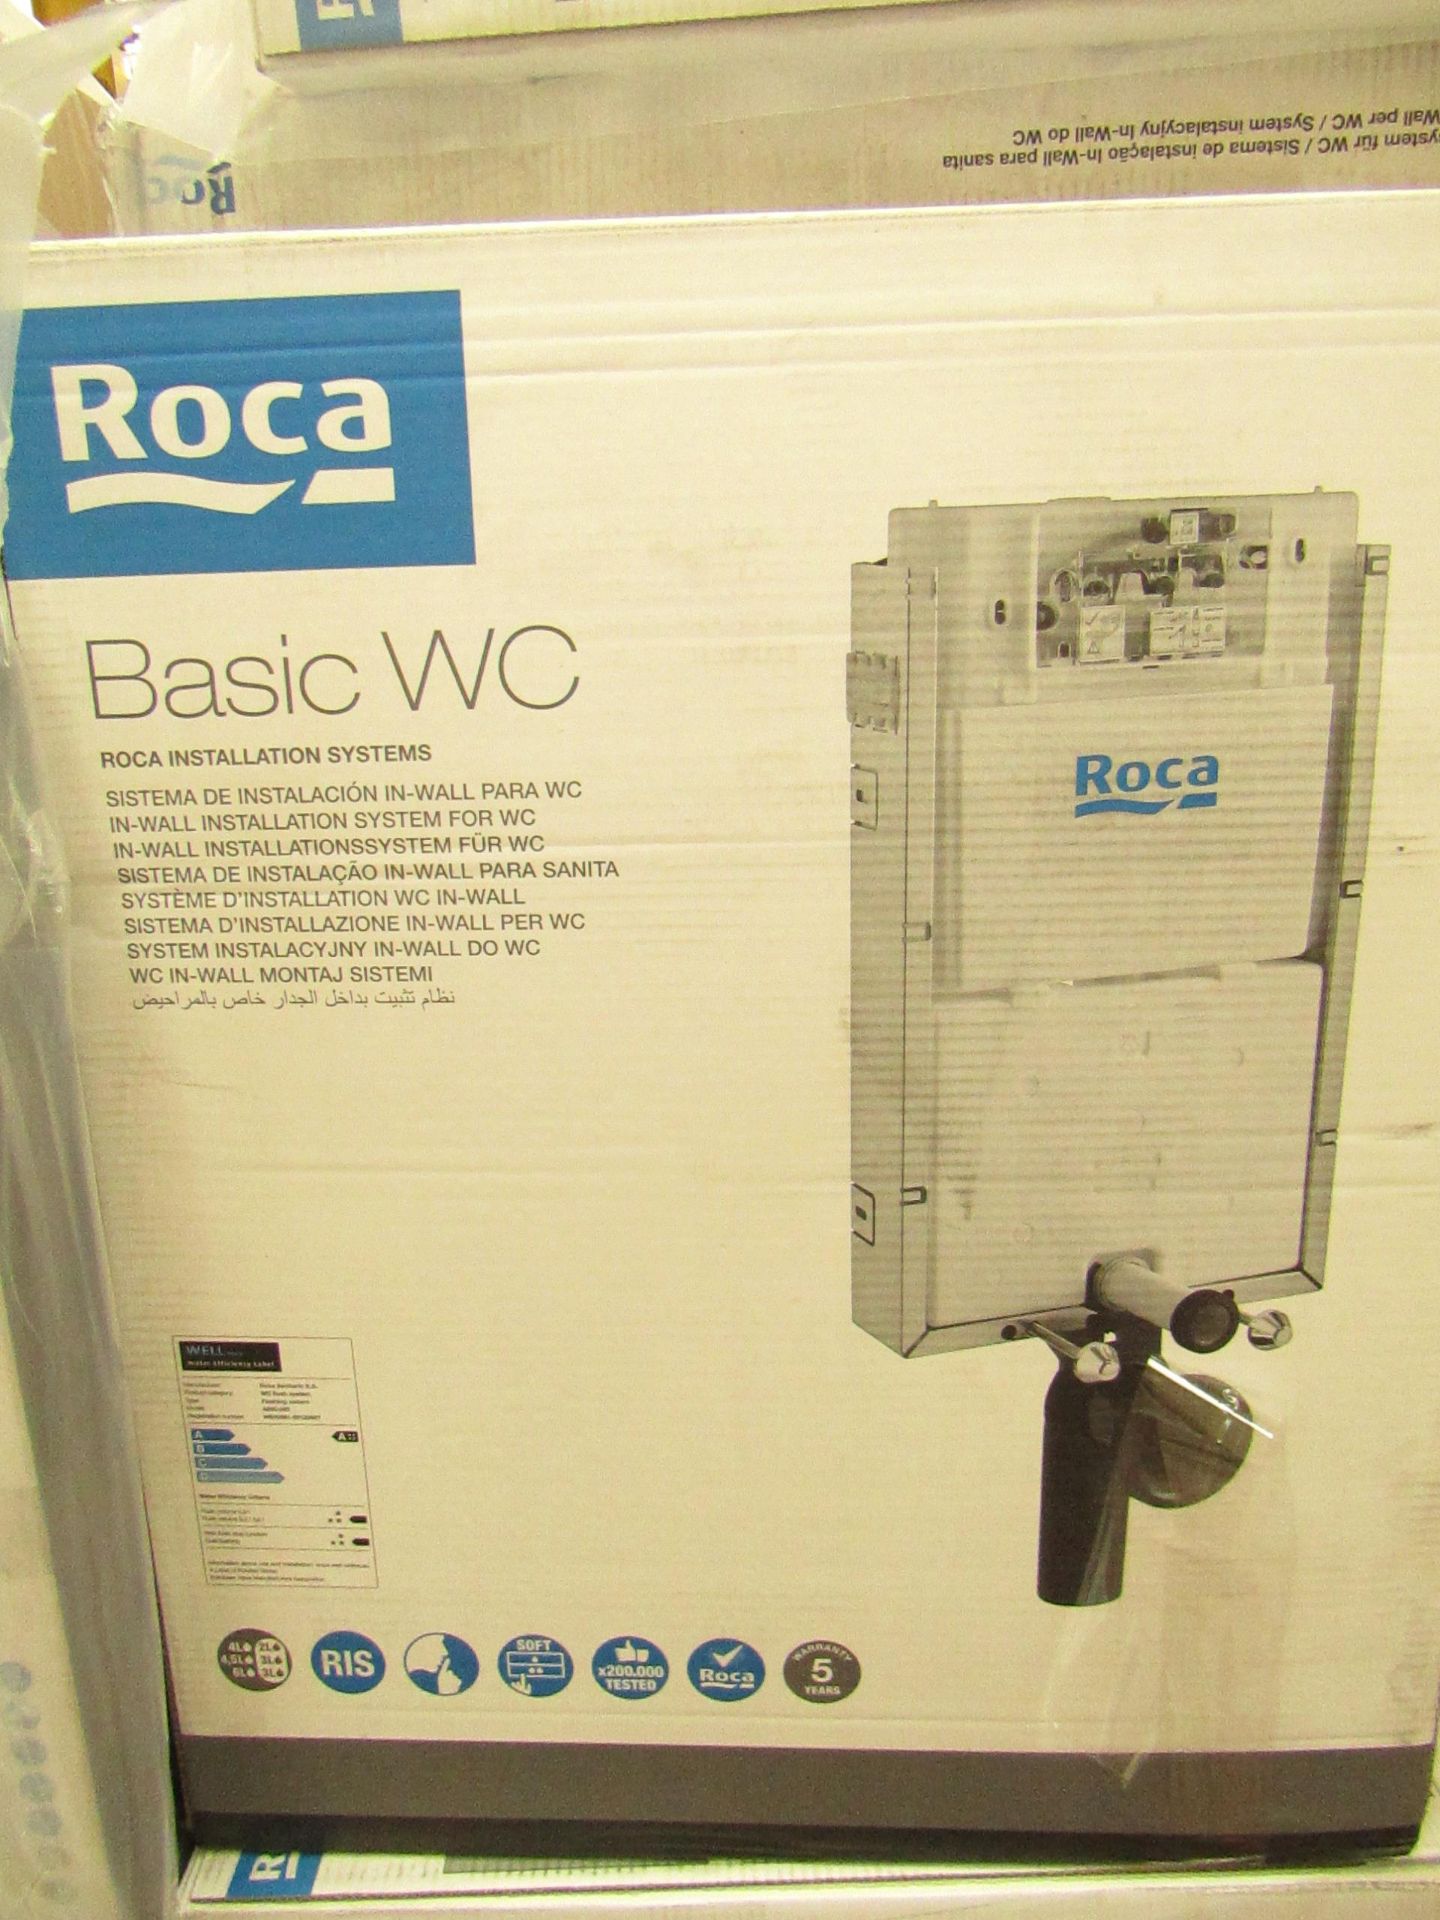 Roca Basic WC in wall installation system for WC, new and boxed. RRP Circa £109.99